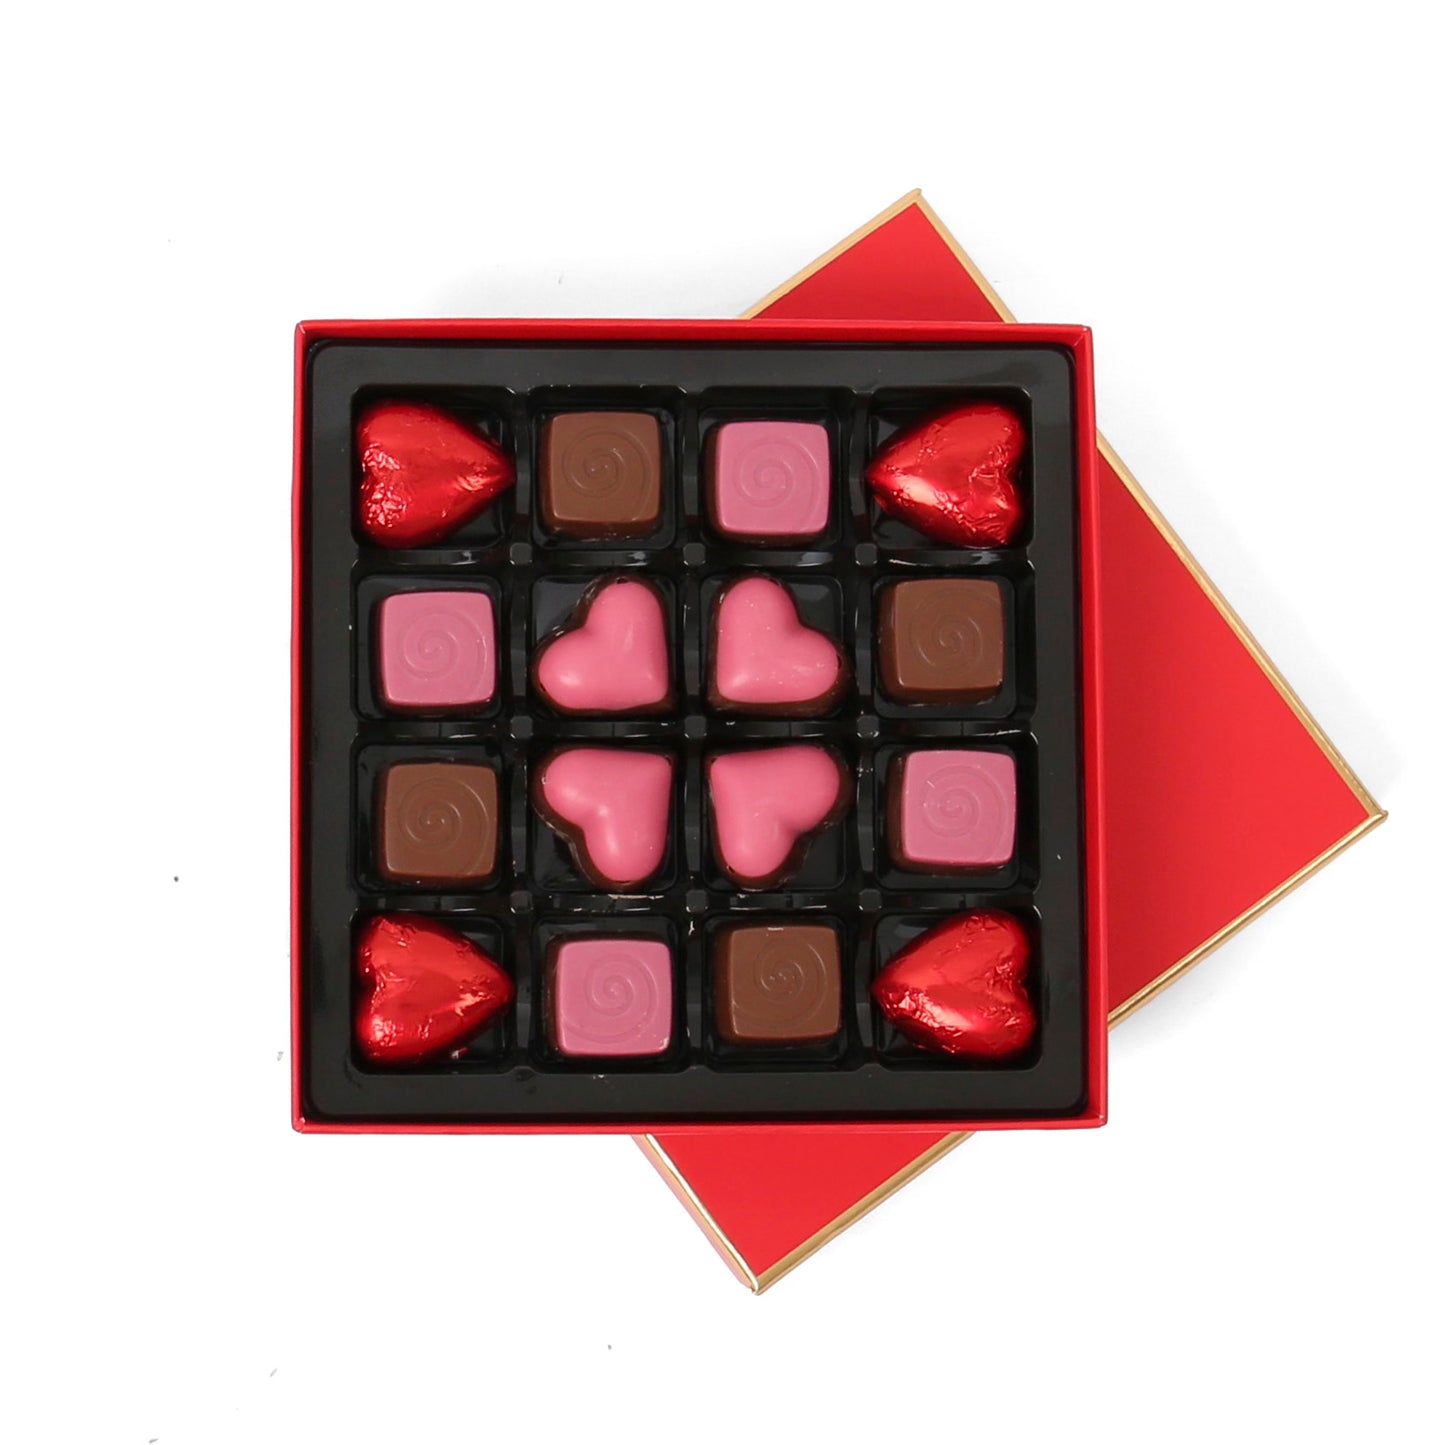 One Cocoa London The Luxury Special Chocolate Gift Box - Heart Shaped Chocolates Chocolate Gift